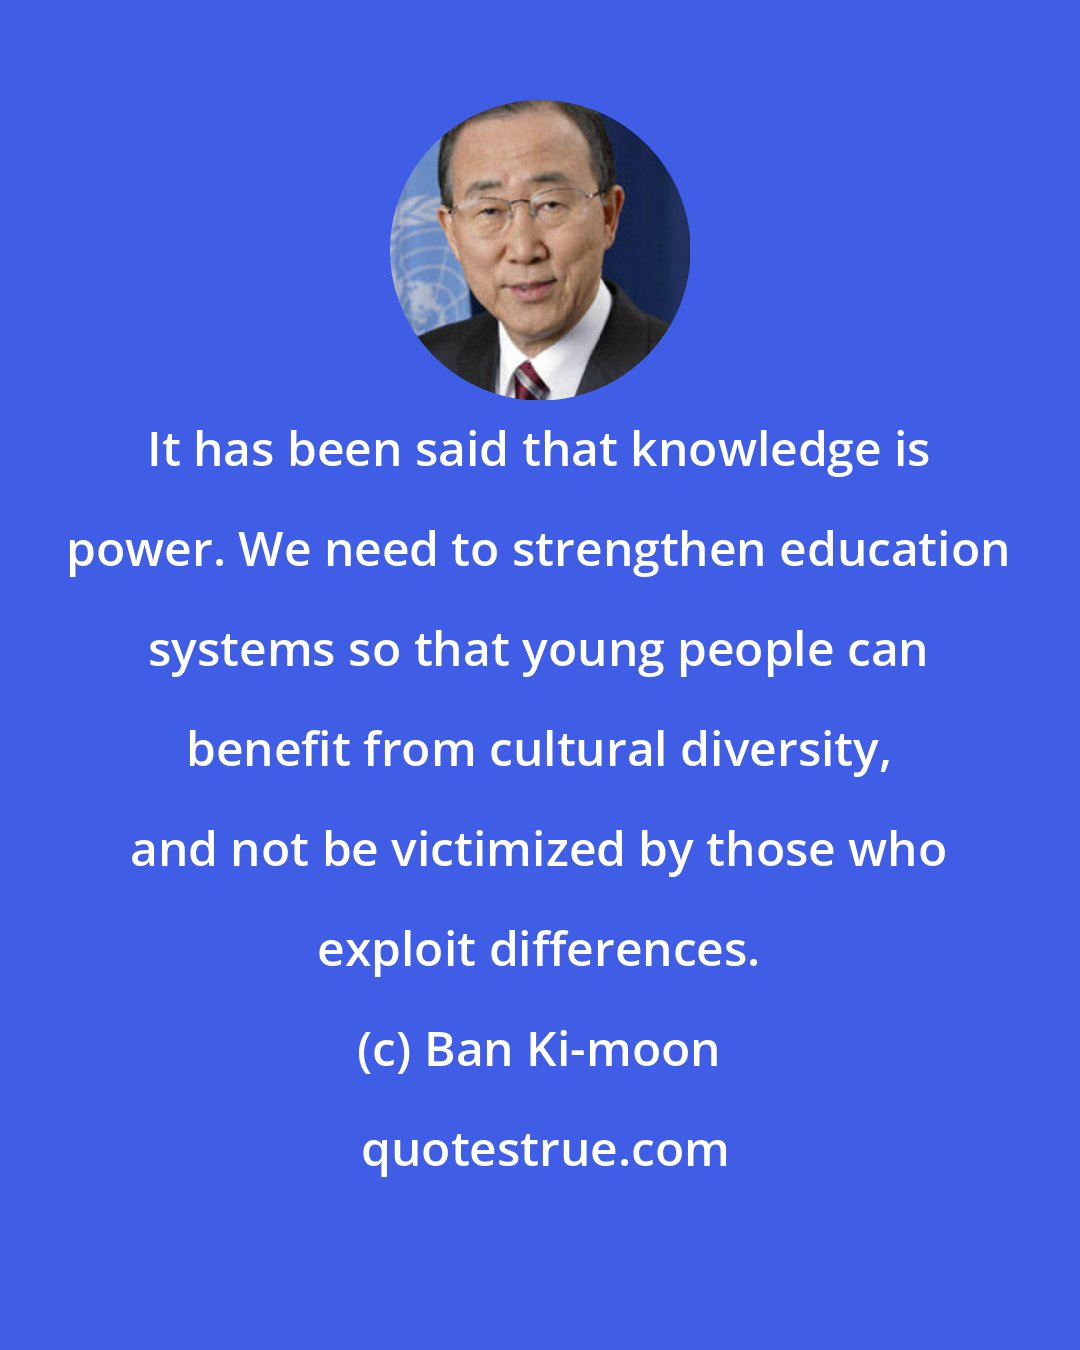 Ban Ki-moon: It has been said that knowledge is power. We need to strengthen education systems so that young people can benefit from cultural diversity, and not be victimized by those who exploit differences.